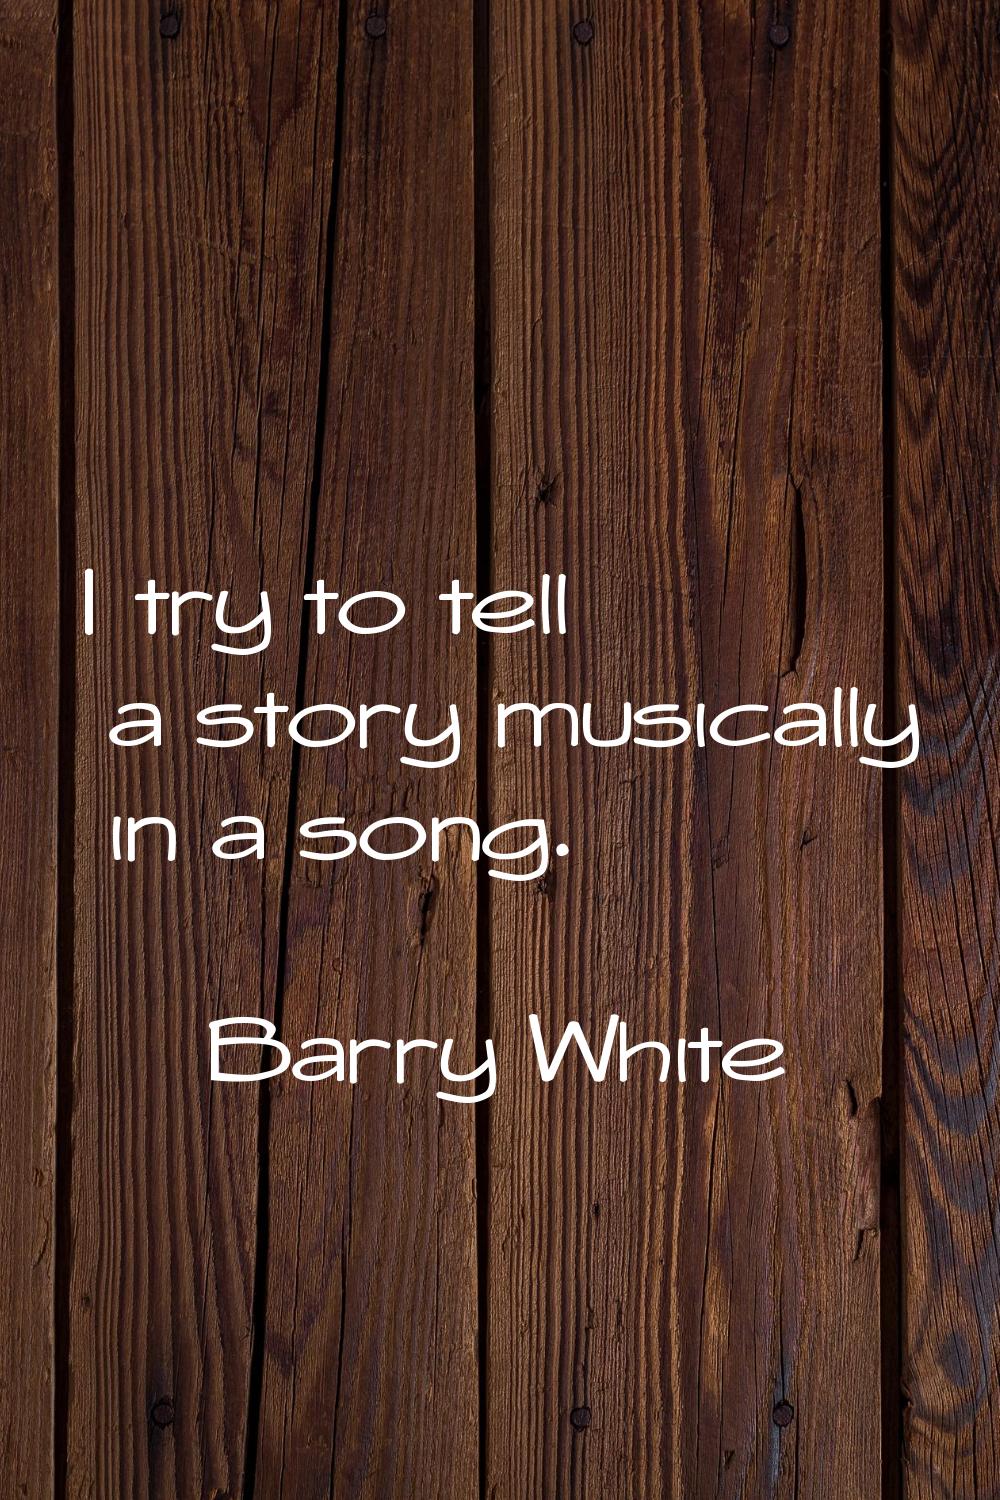 I try to tell a story musically in a song.